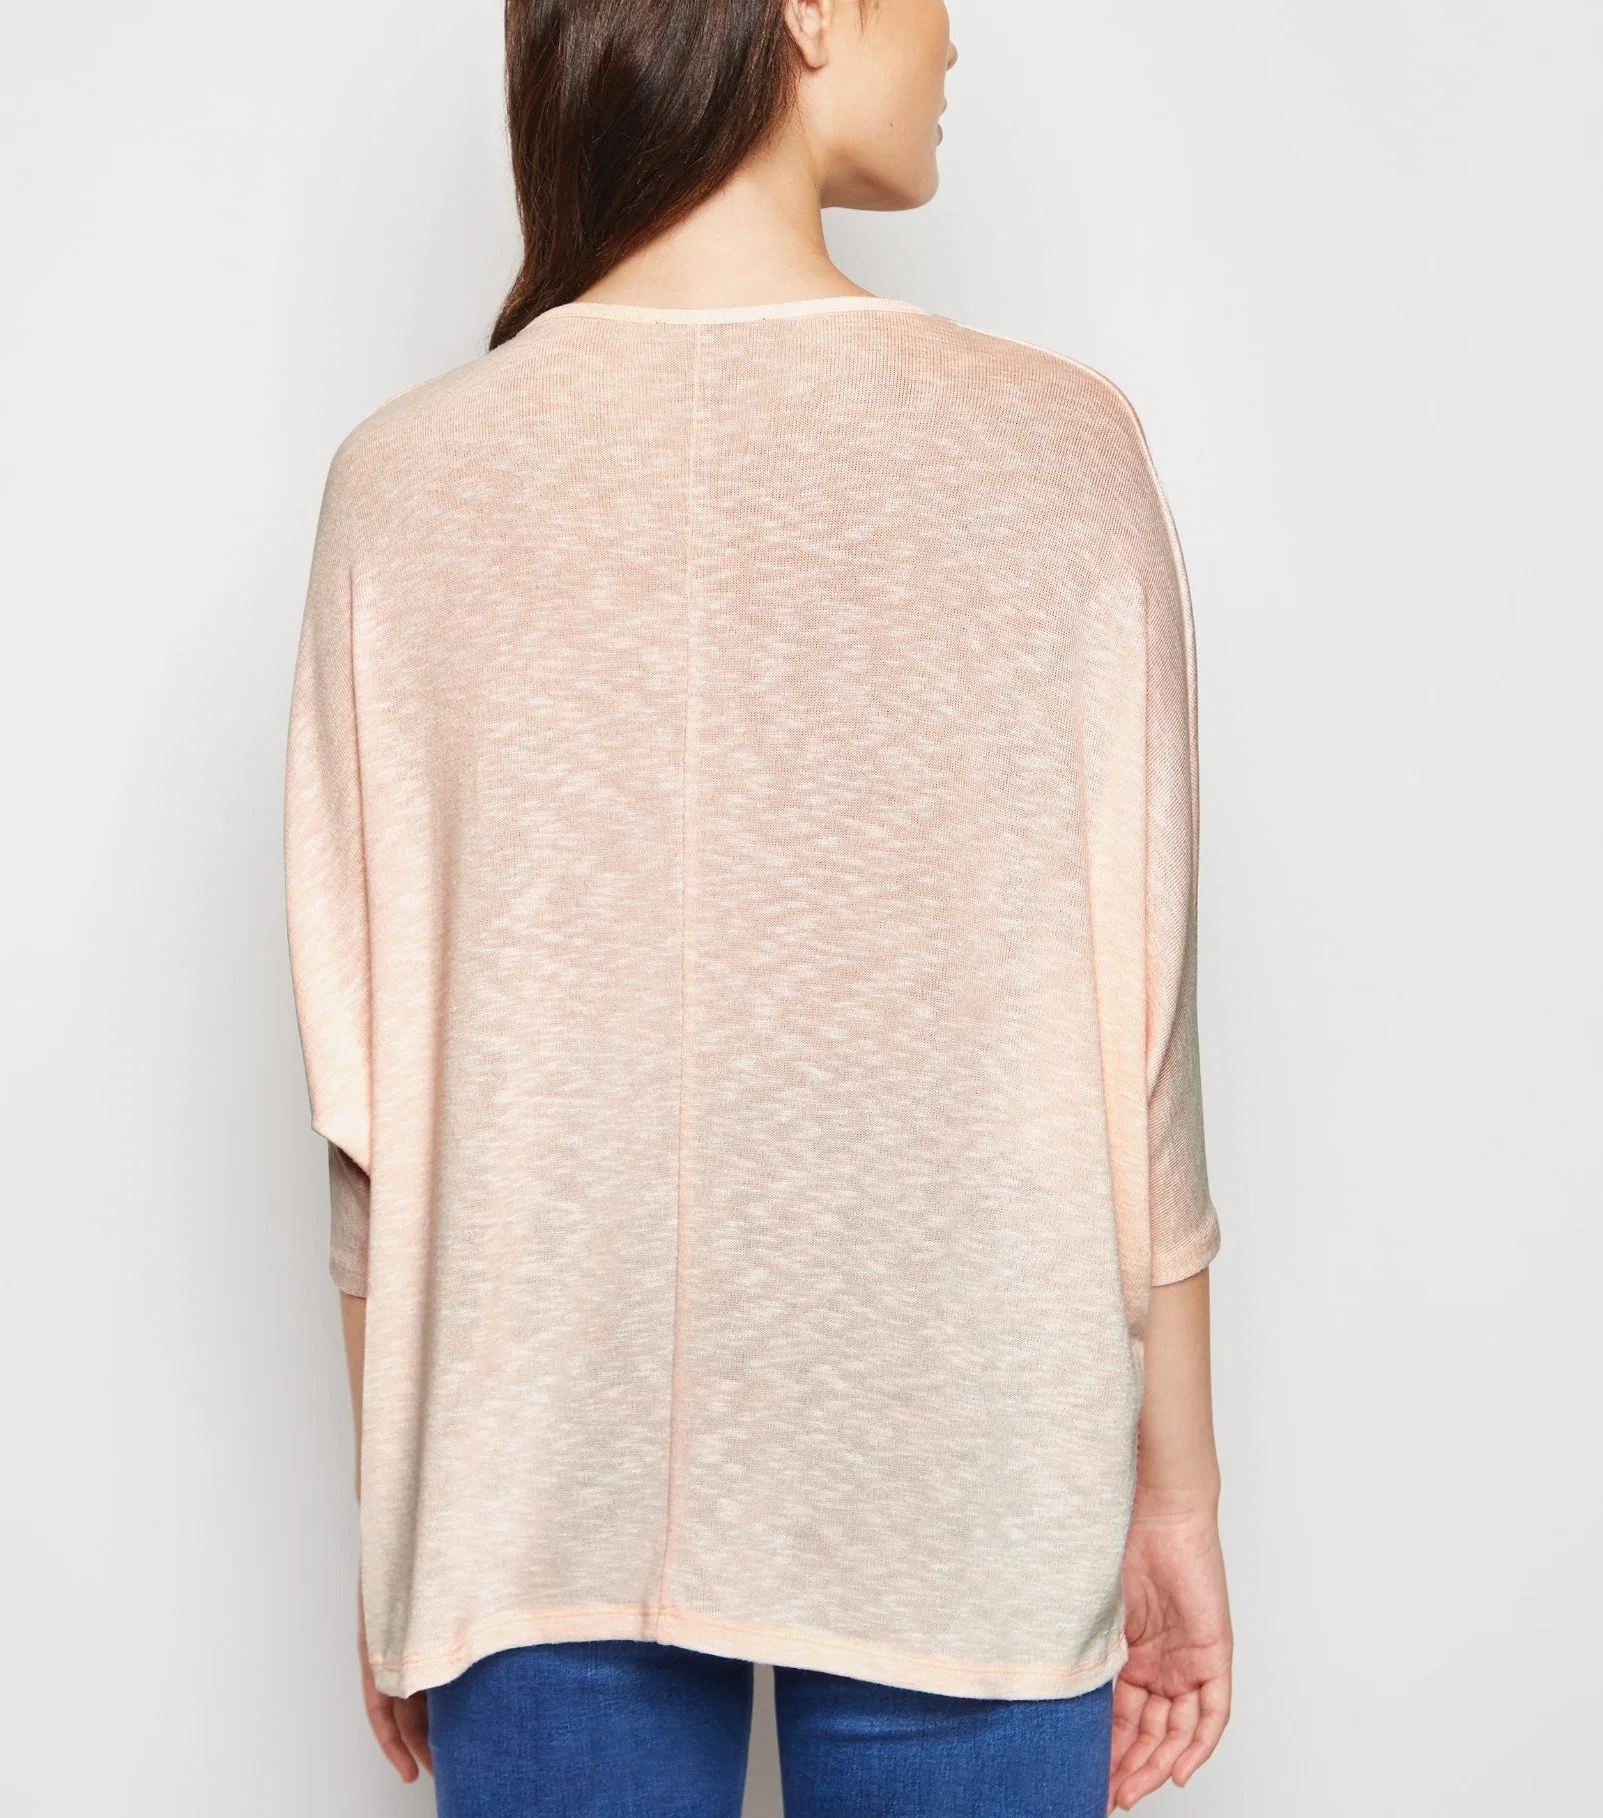 Women Fashion Knitted Pale Pink Fine Knit Batwing Sleeve Top Sweater